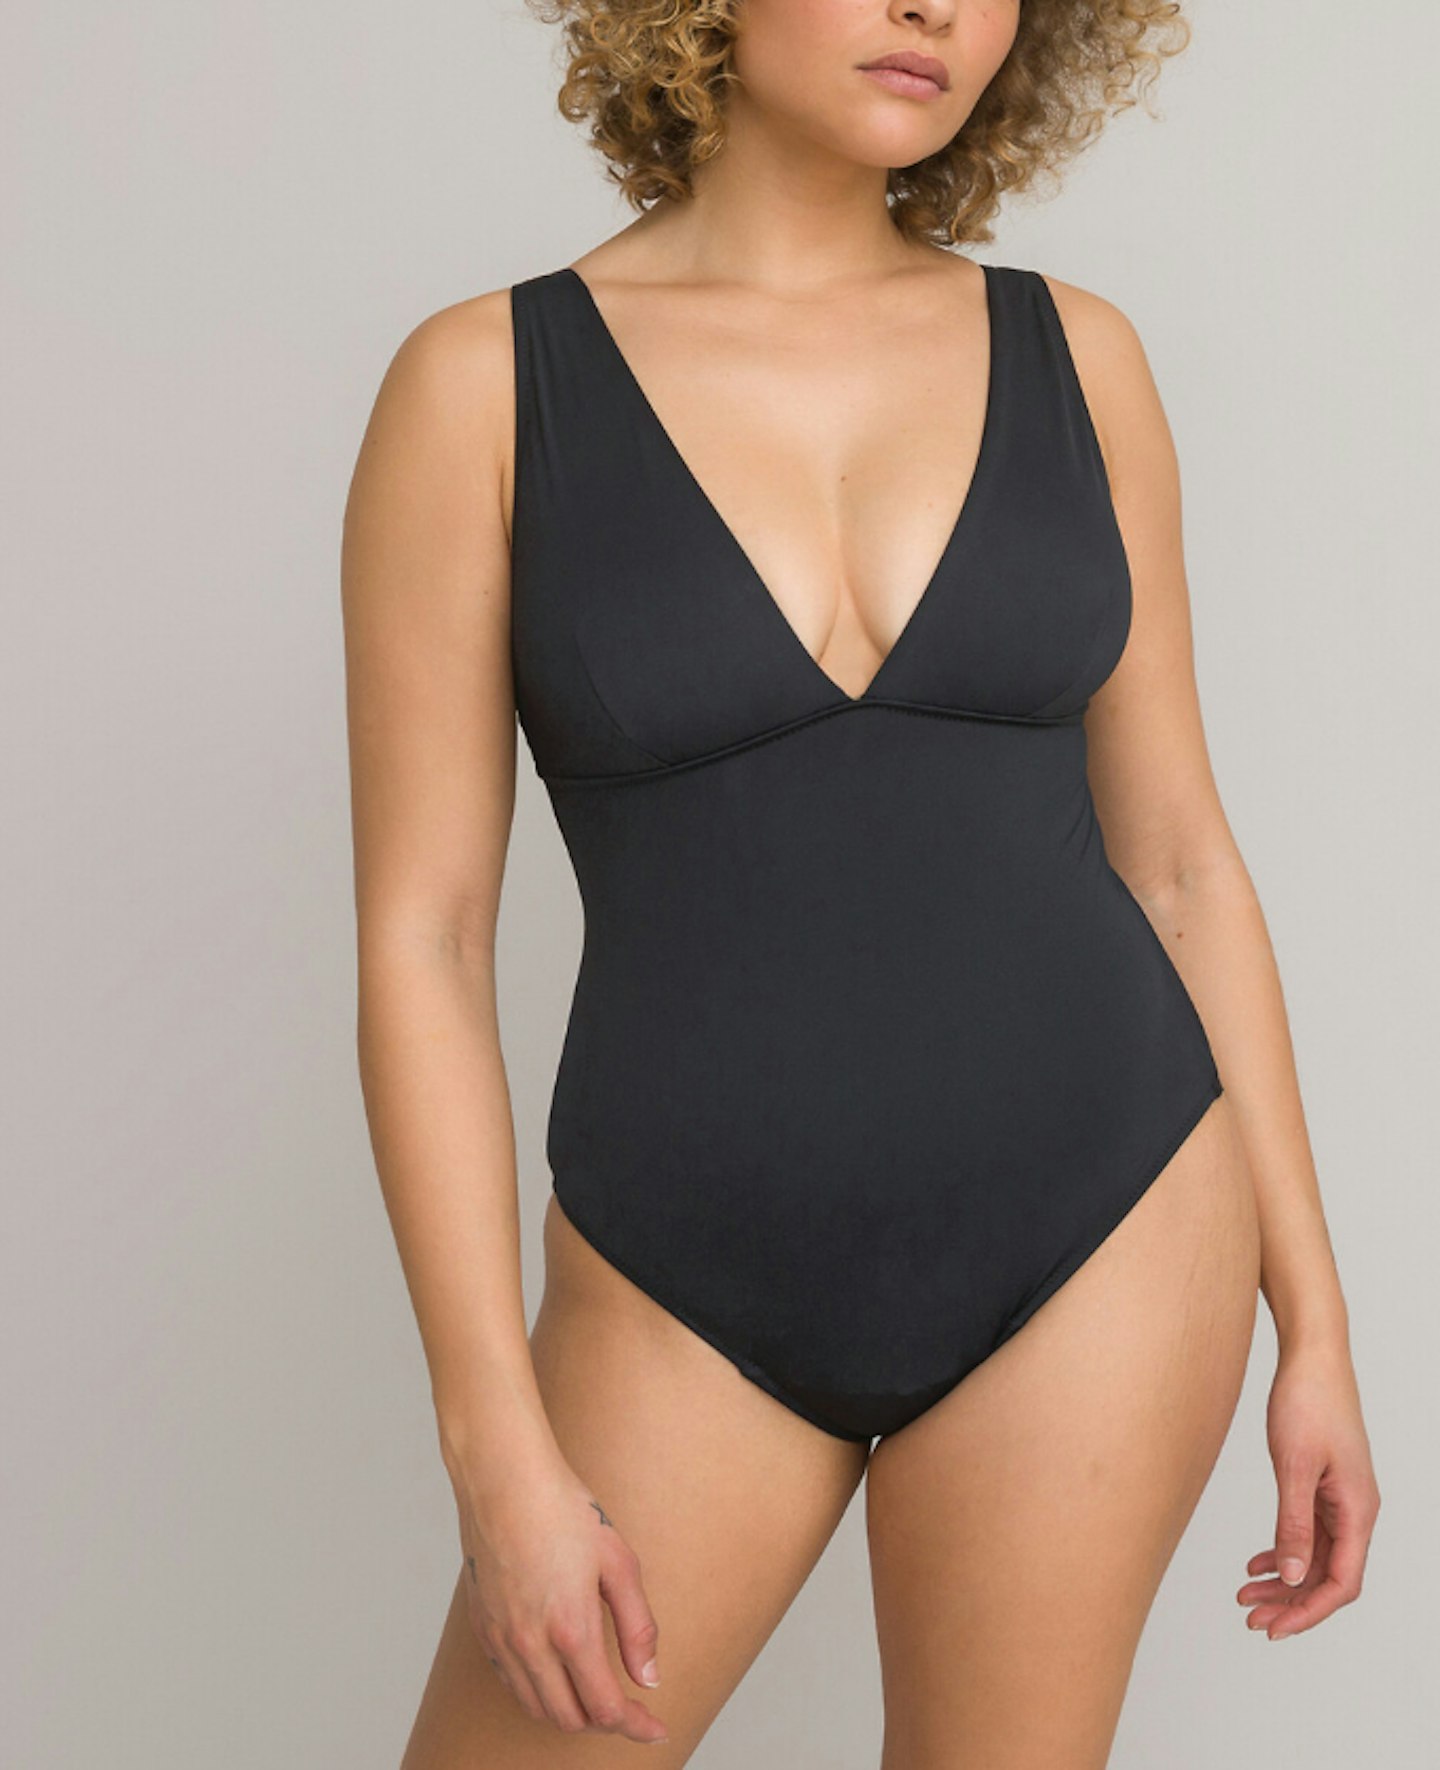 La Redoute, Recycled Period Triangle Swimsuit